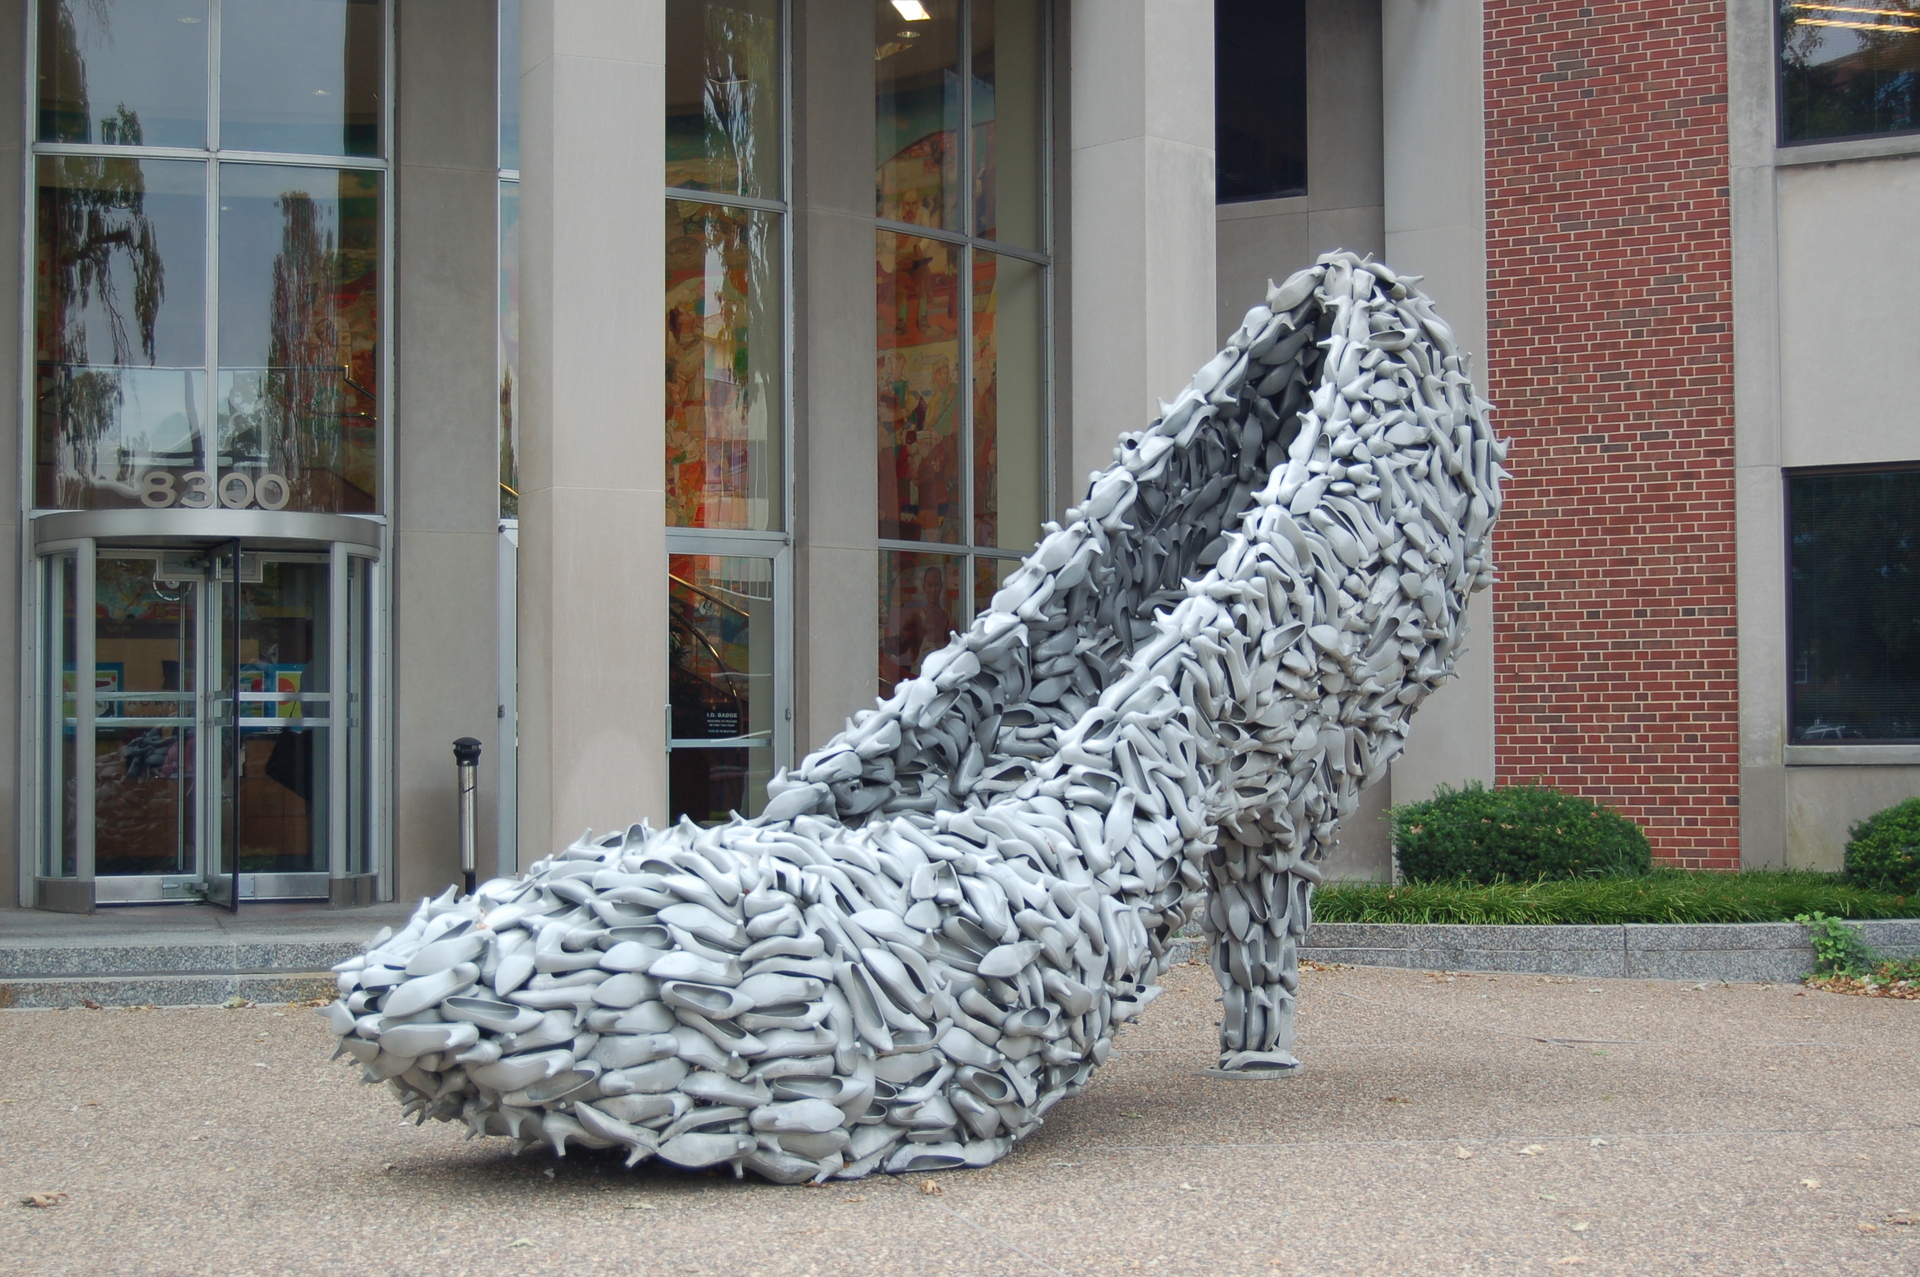 photograph of a stiletto heel shoe that is made of many heeled shoes. The sculpture is located in front of a building